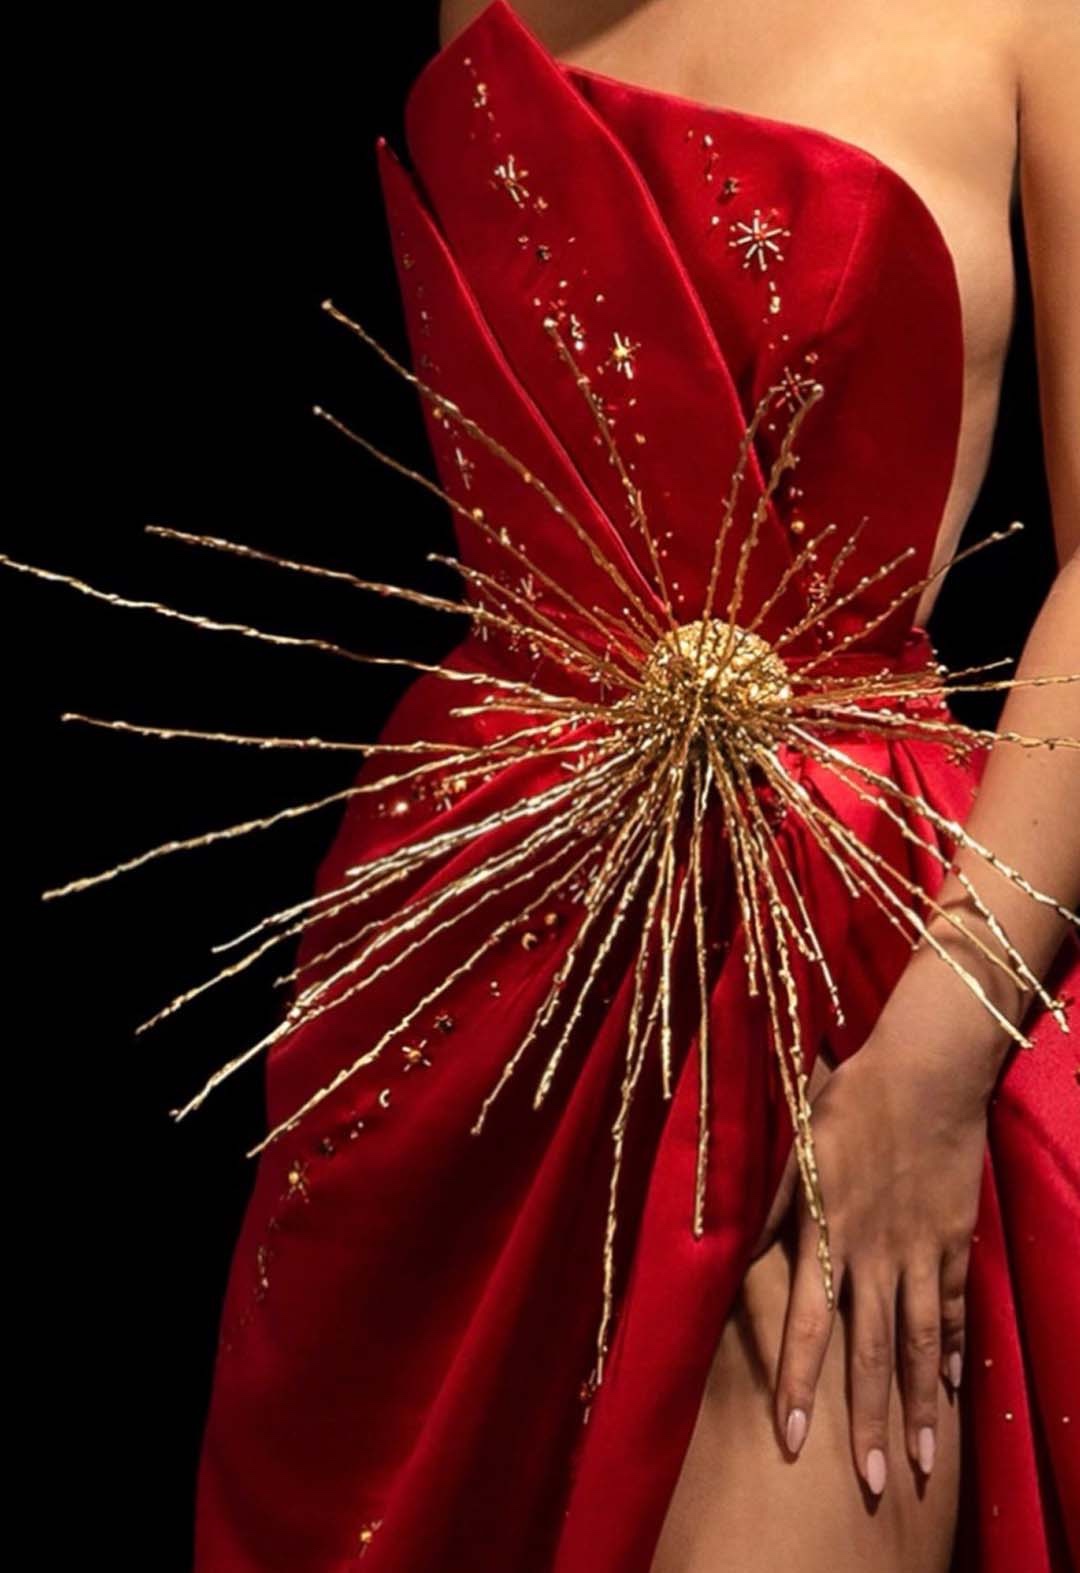 Beaded gold metal star represents an atomic star with variety of beads bursting out throughout the pleats and along the bodice.